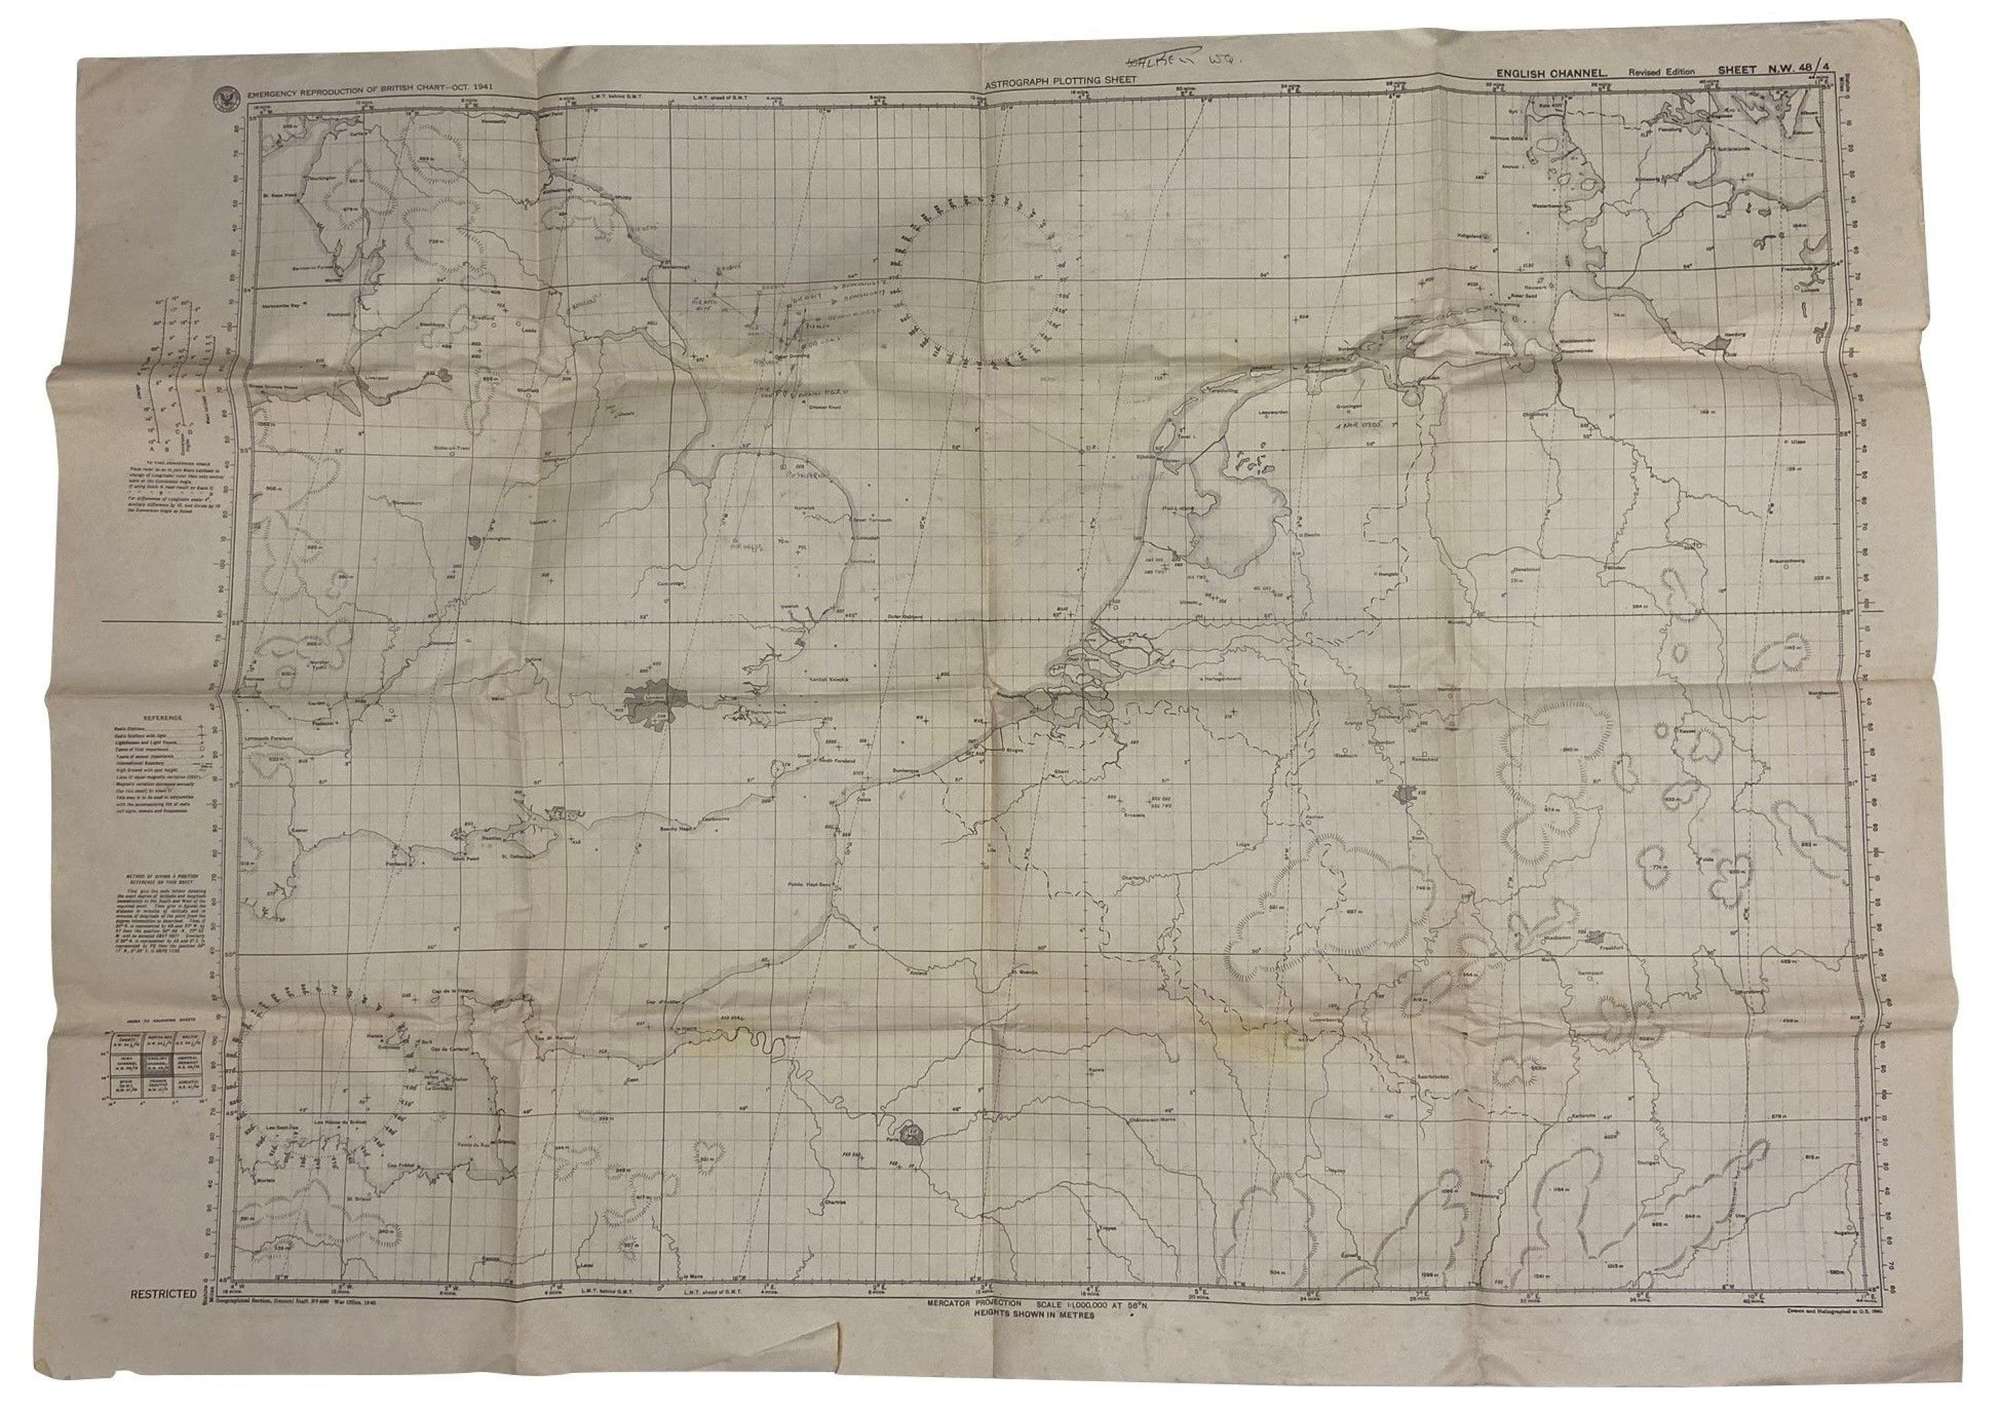 Original 1941 Dated USAAF Astrograph Plotting Map - English Channel